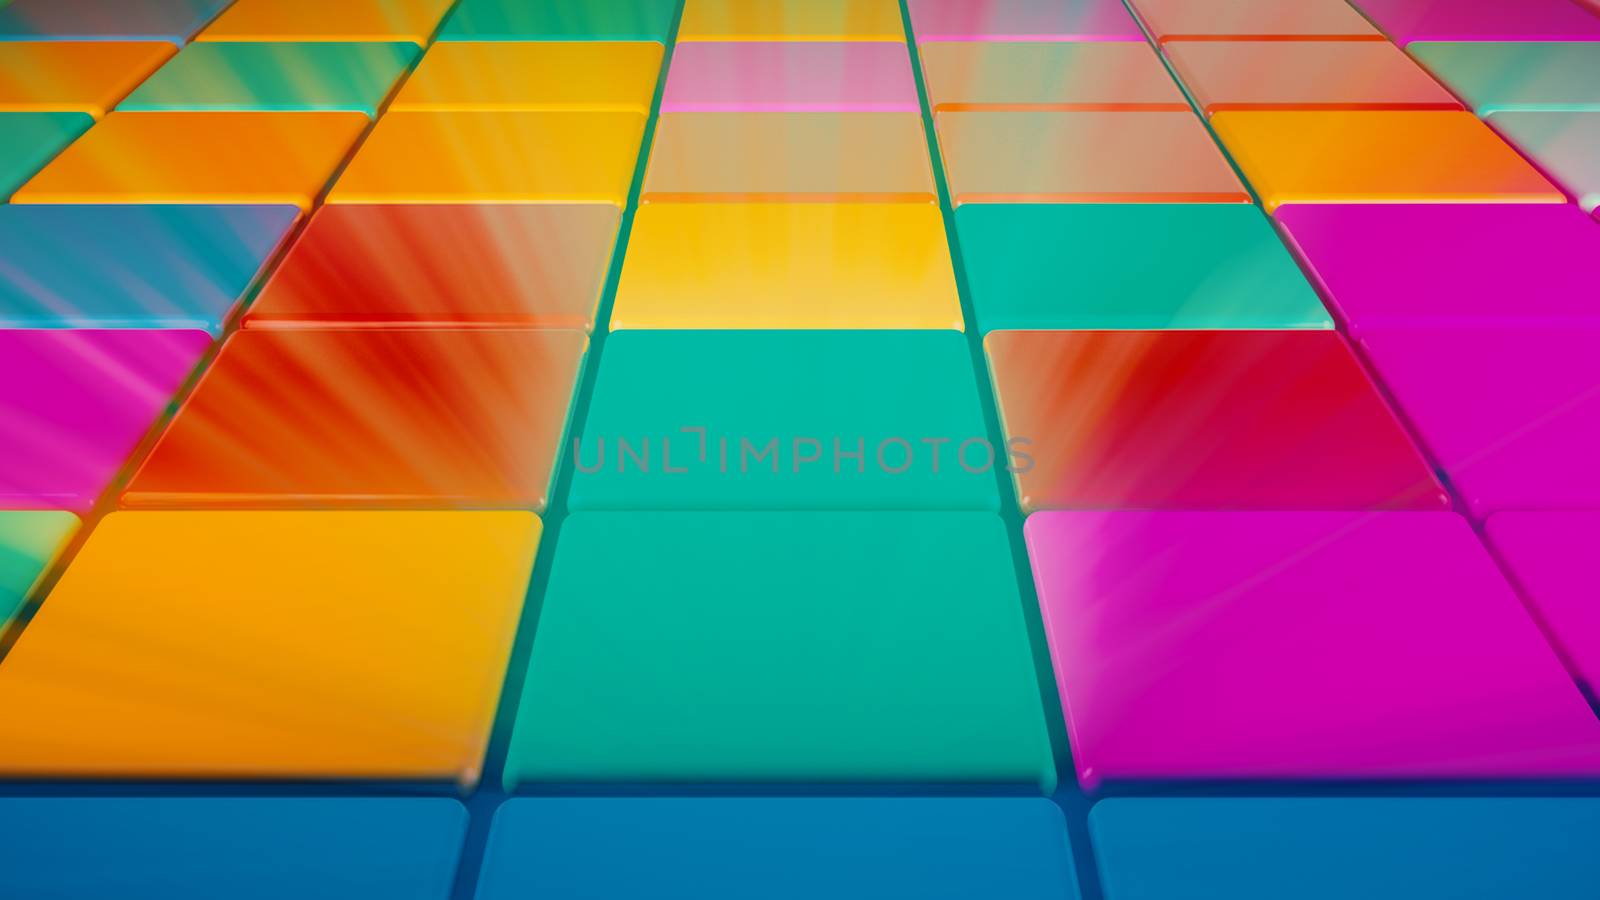 Colorful square shape lighting of disco dance floor by nolimit046